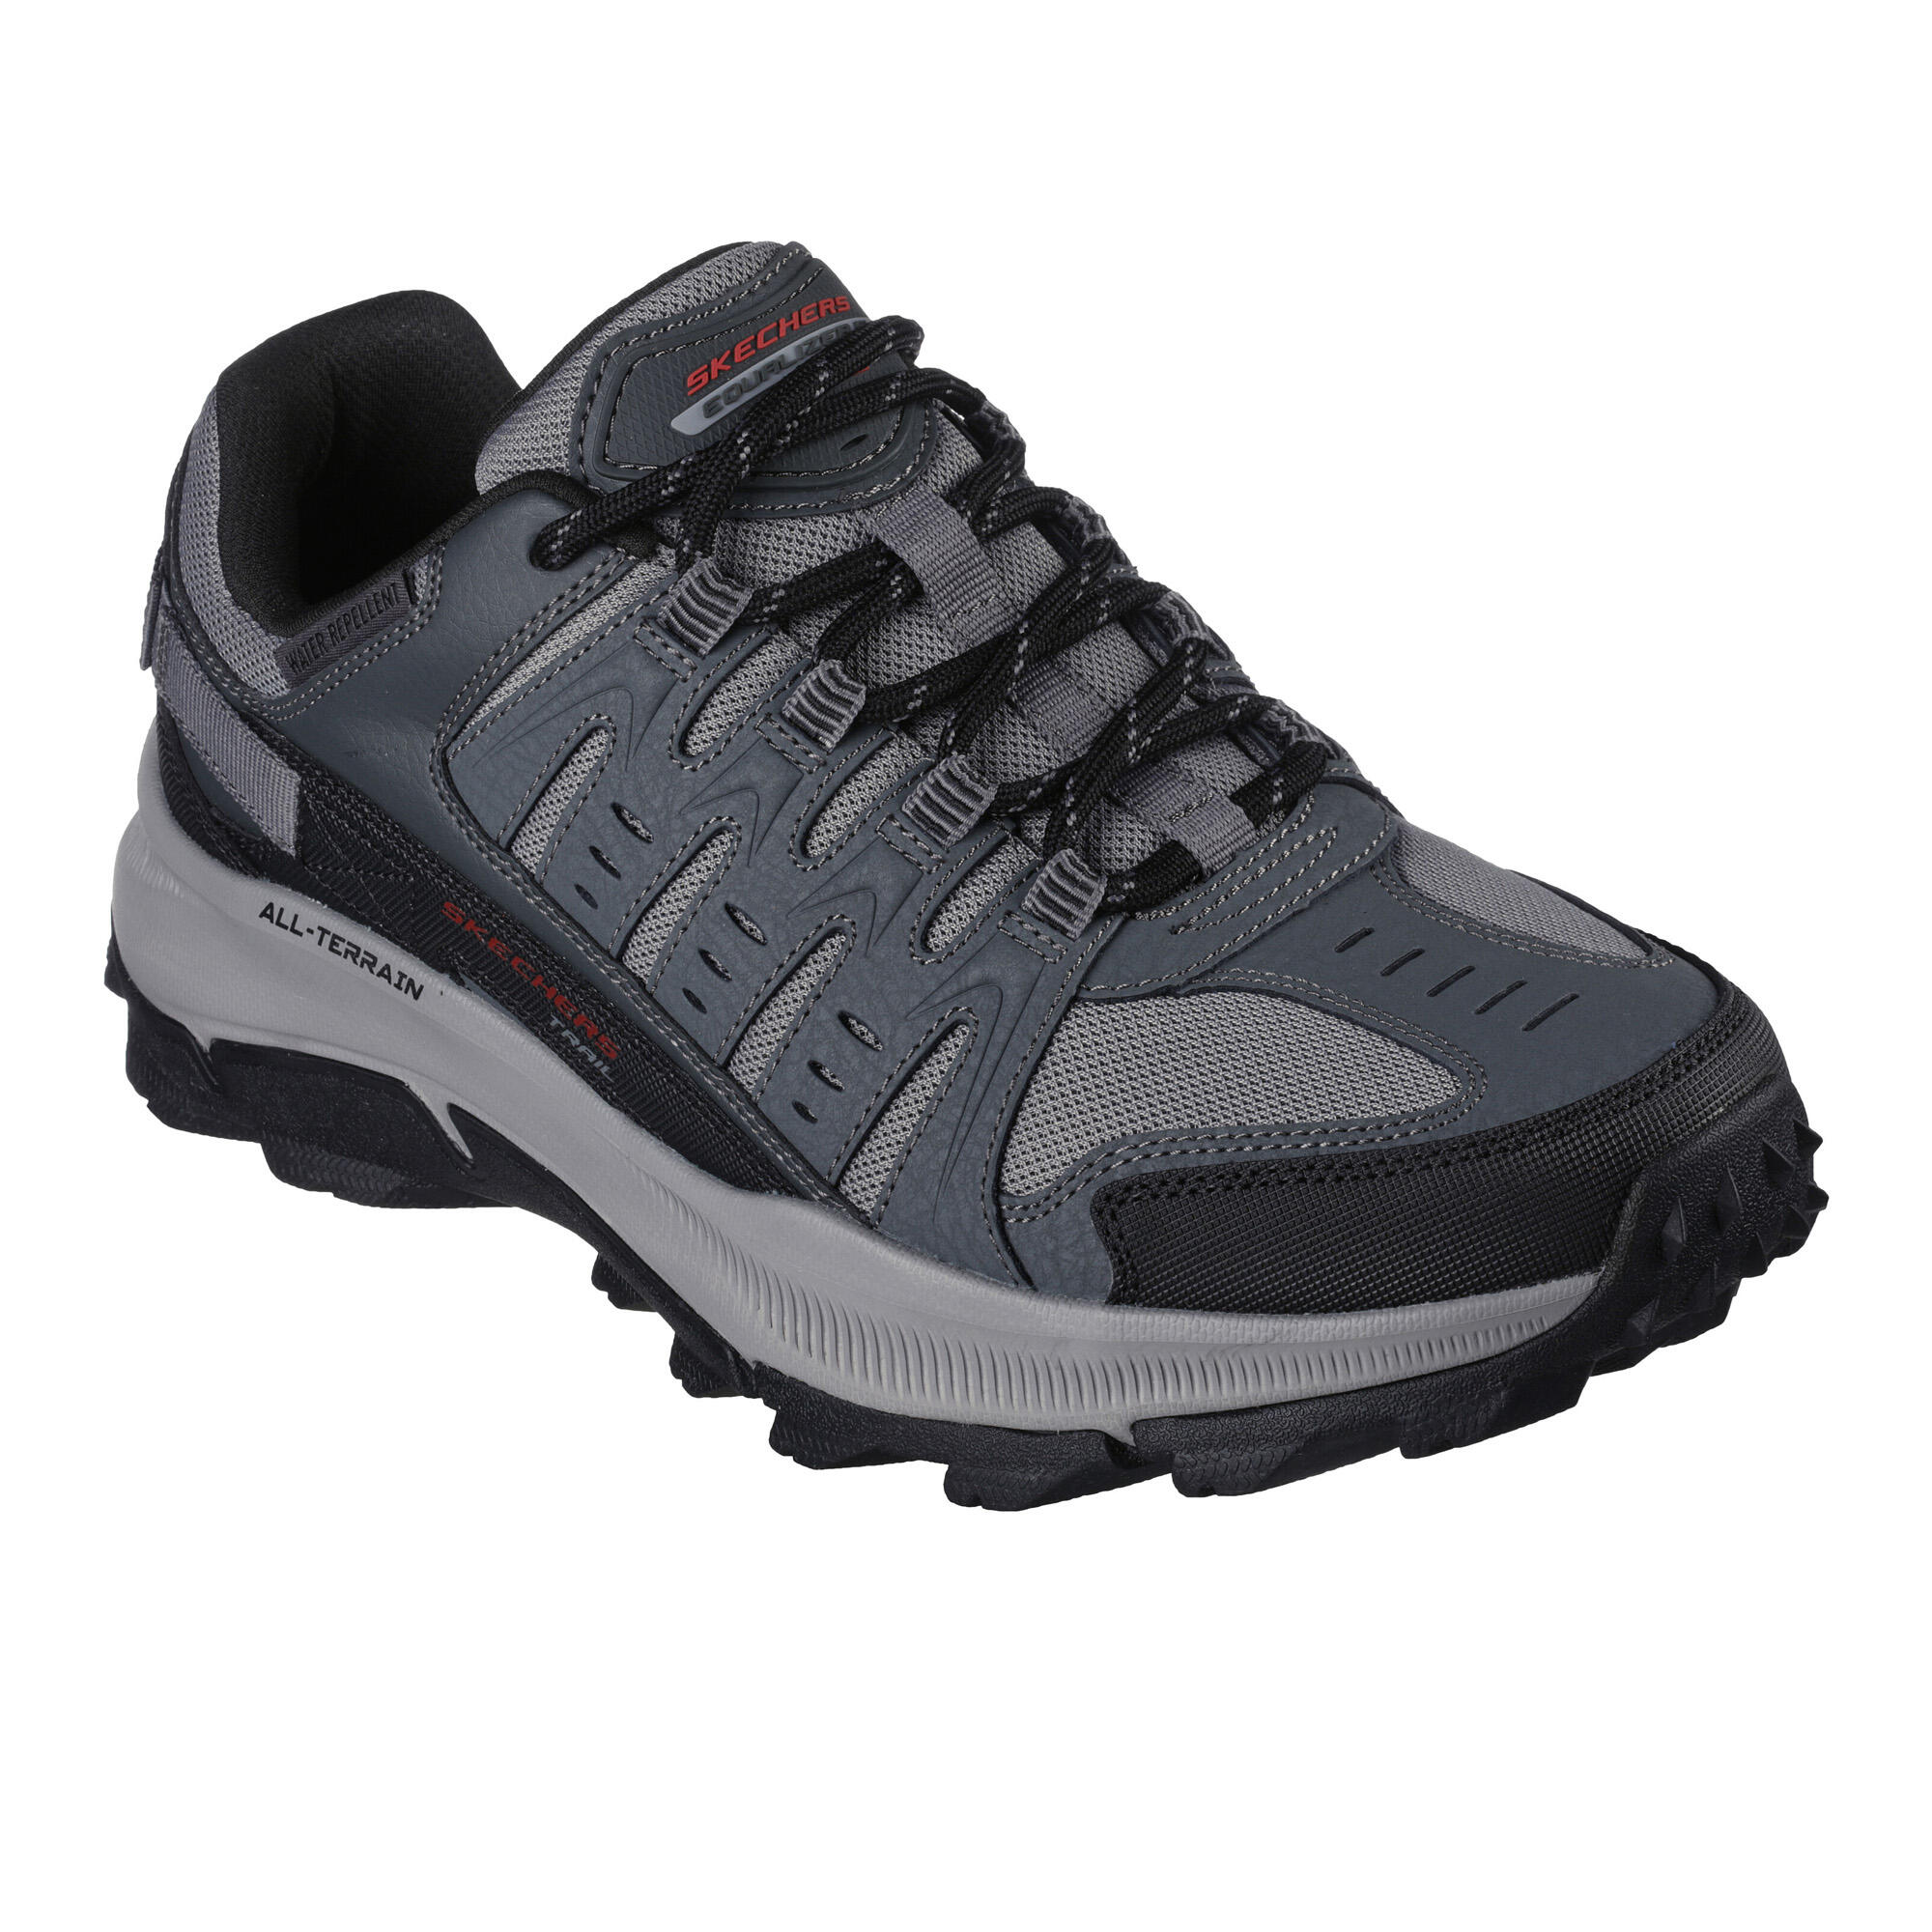 SKECHERS Mens Equalizer 5.0 Trail Solix Leather Trainers (Charcoal/Black)